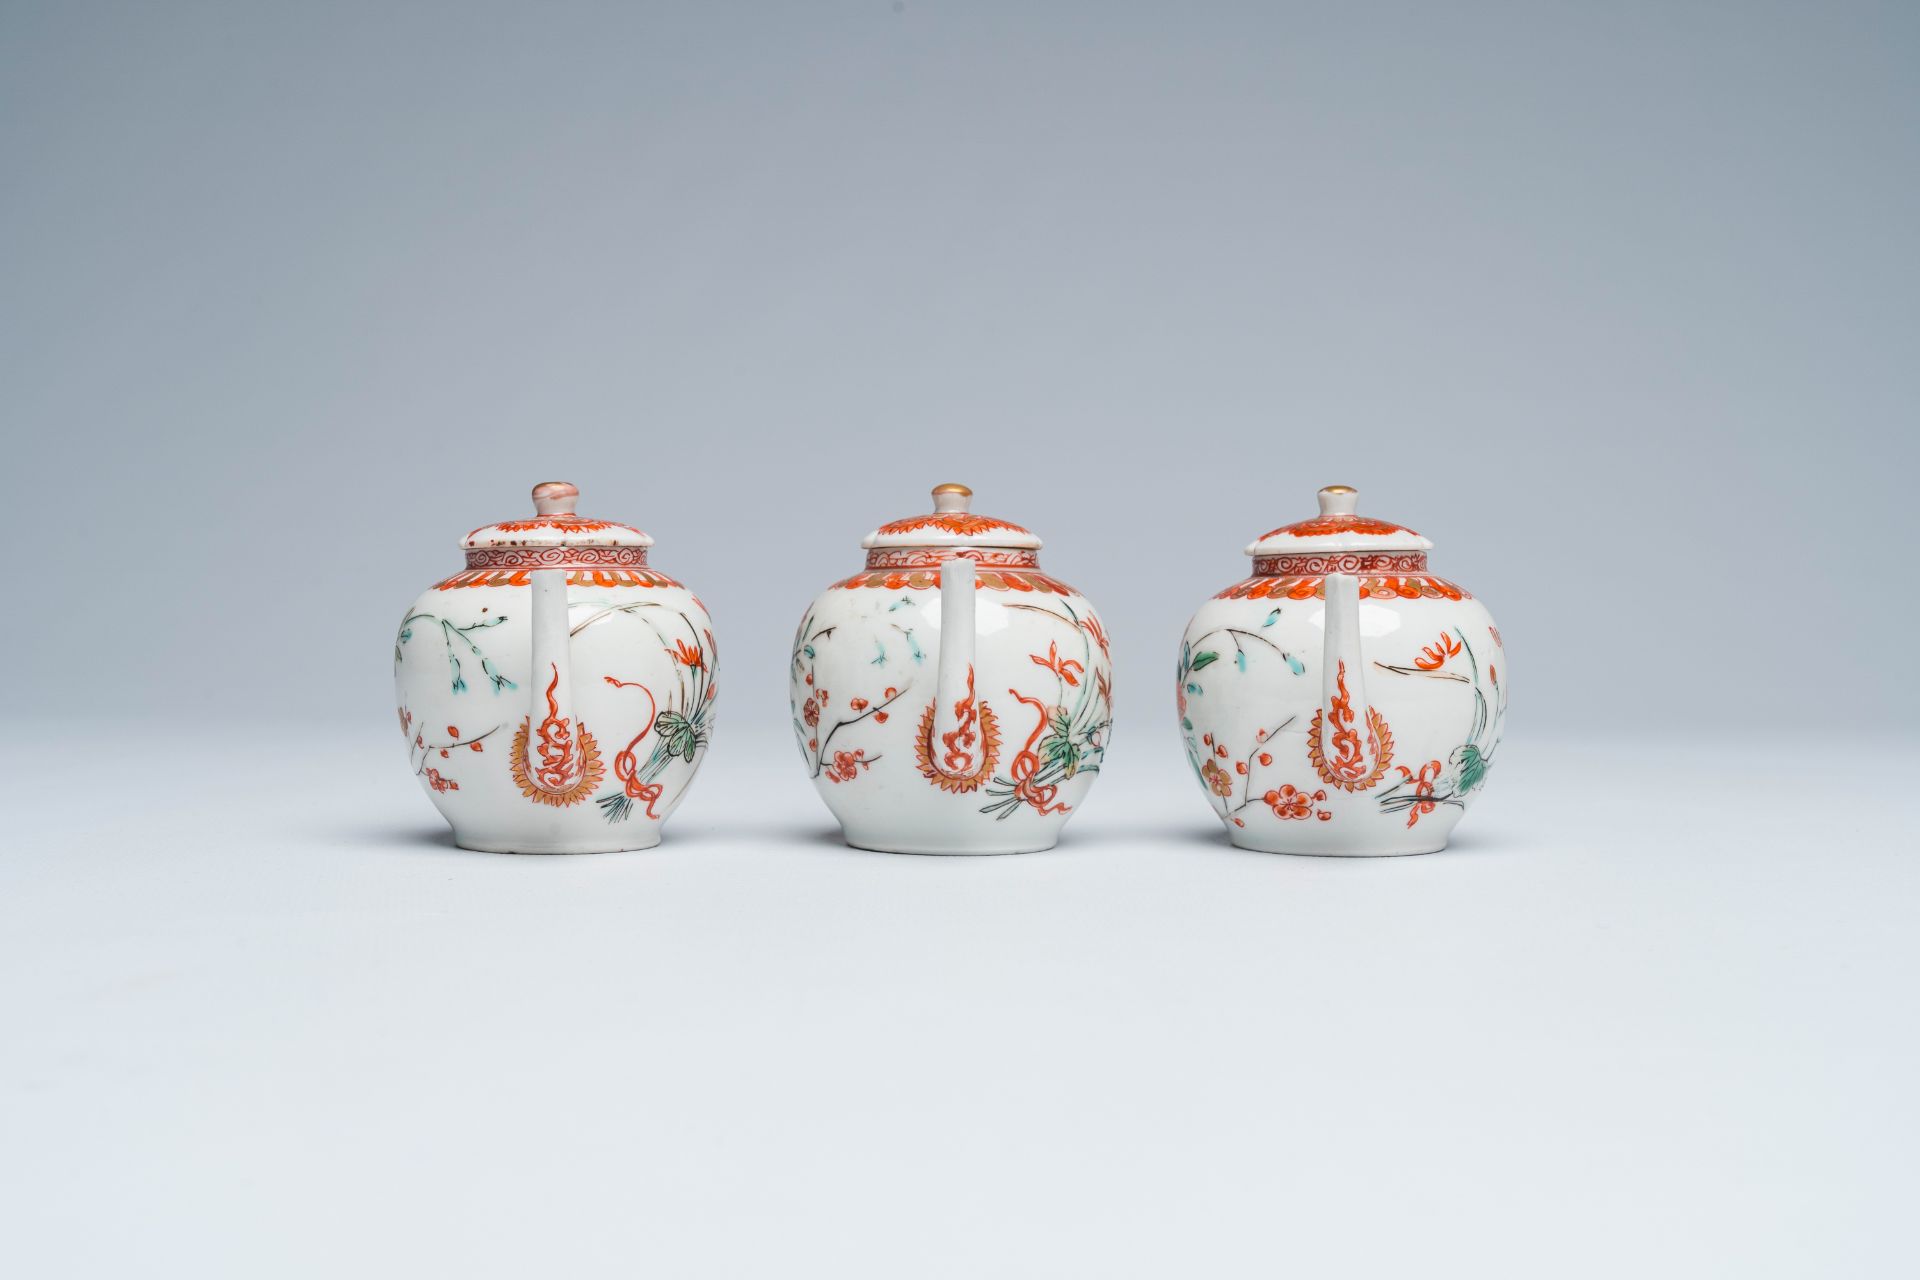 Three Japanese Kakiemon style teapots and covers with floral design, Edo, late 17th C. - Image 3 of 7